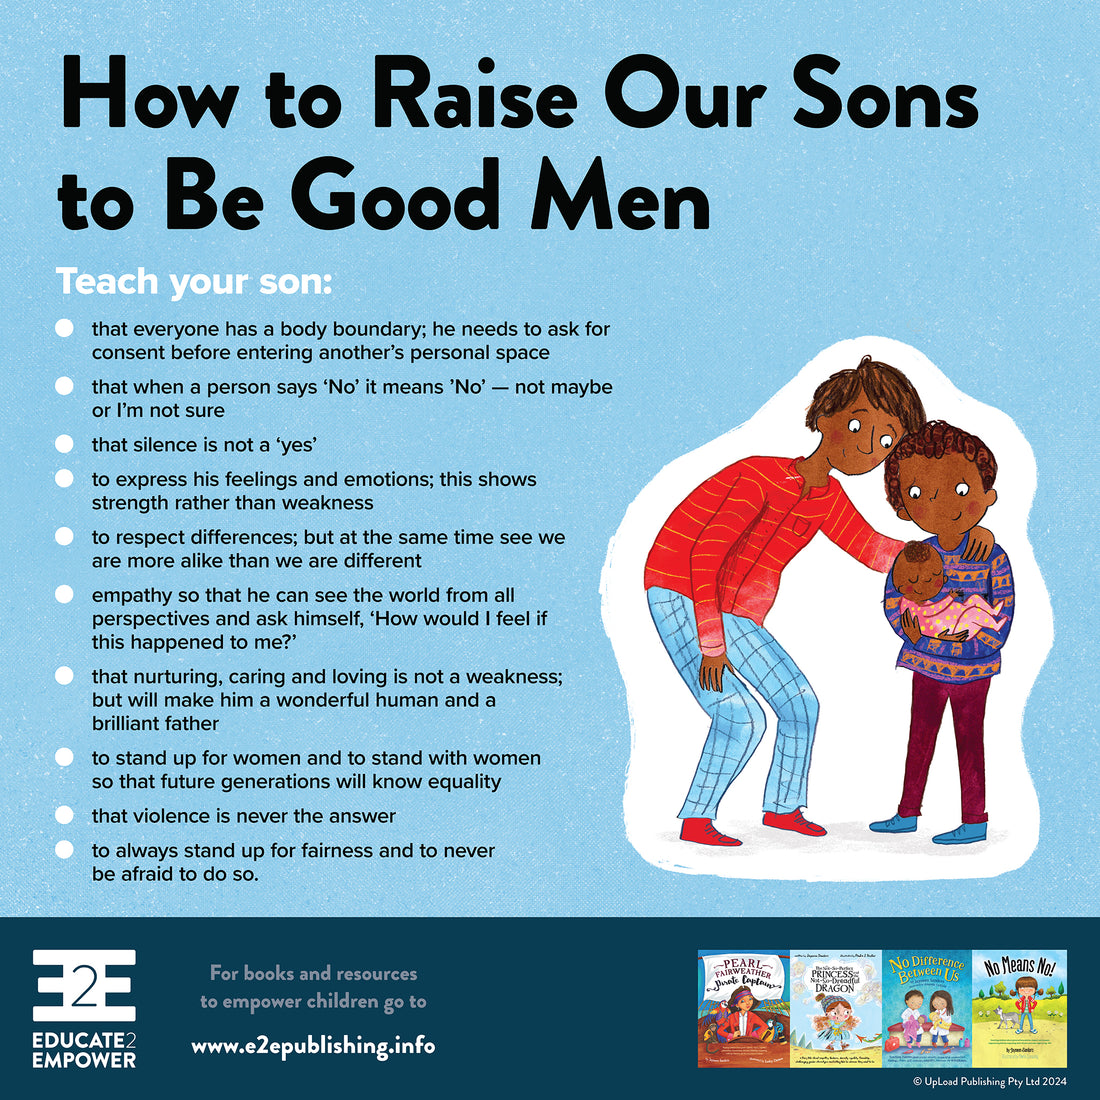 How to Raise Our Sons to Be Good Men